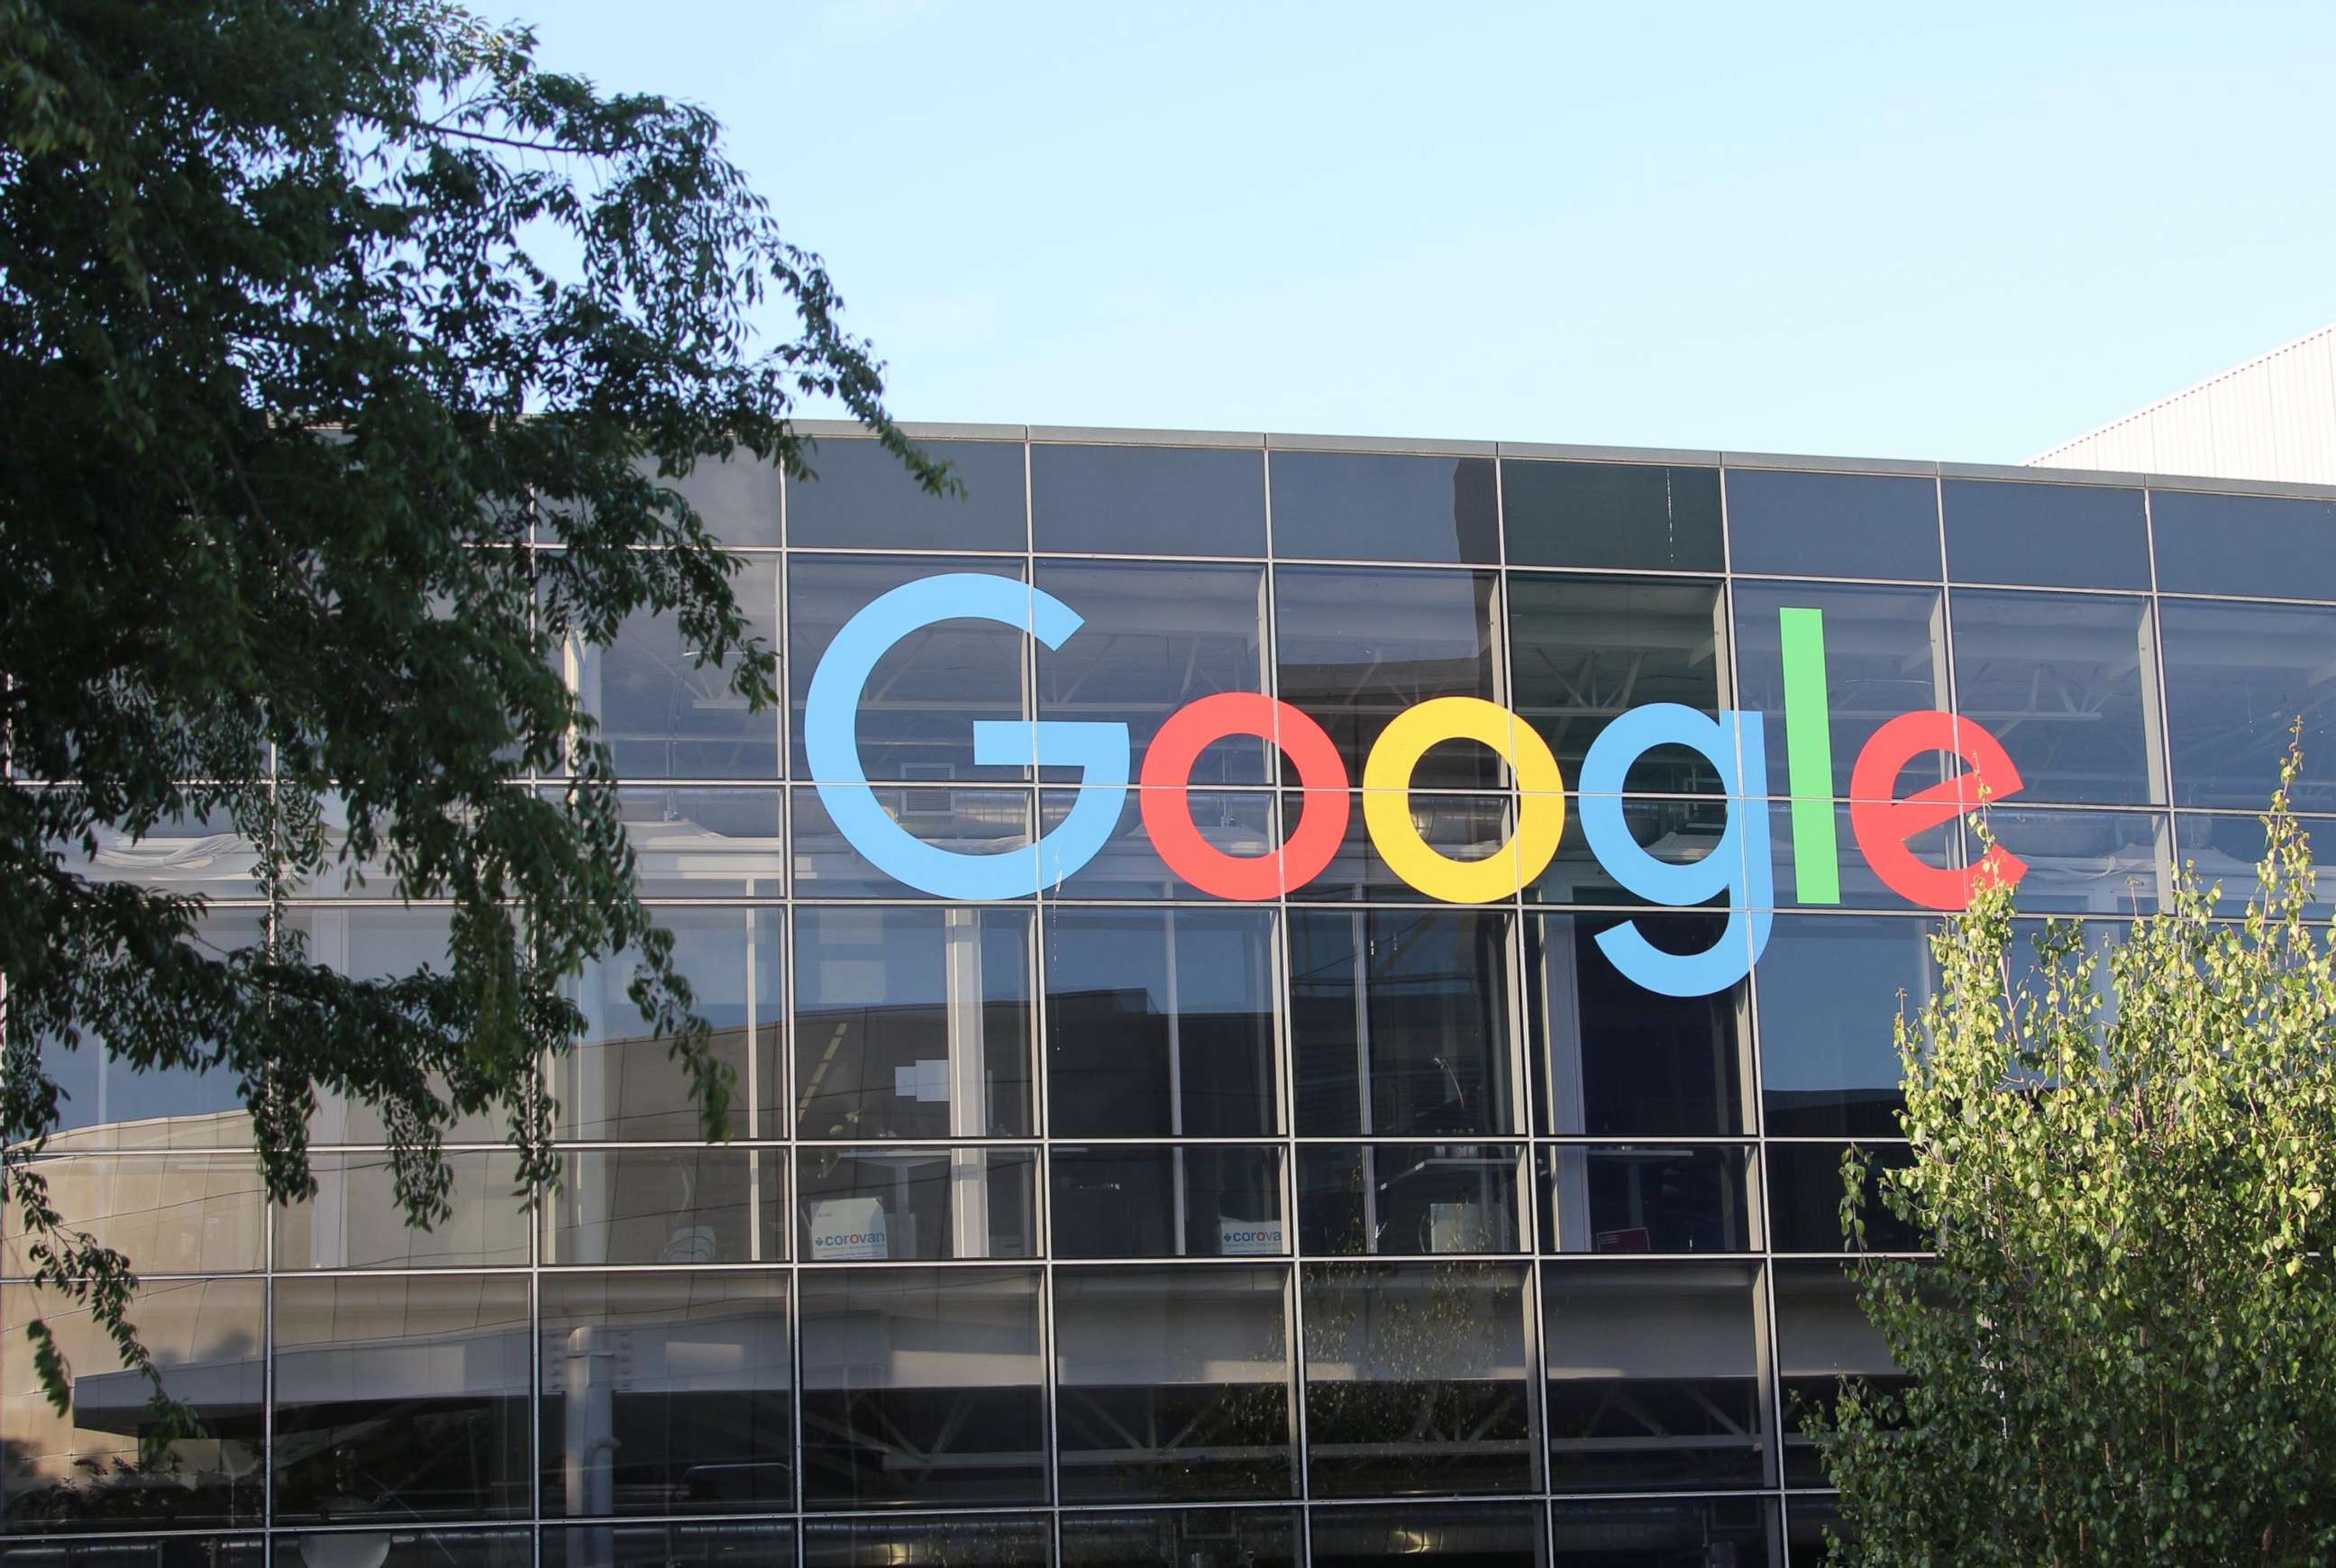 PHOTO: In this May 8, 2018, file photo, the Google logo is shown on the facade of Google's parent company Alphabet headquarters in Mountain View, Calif.